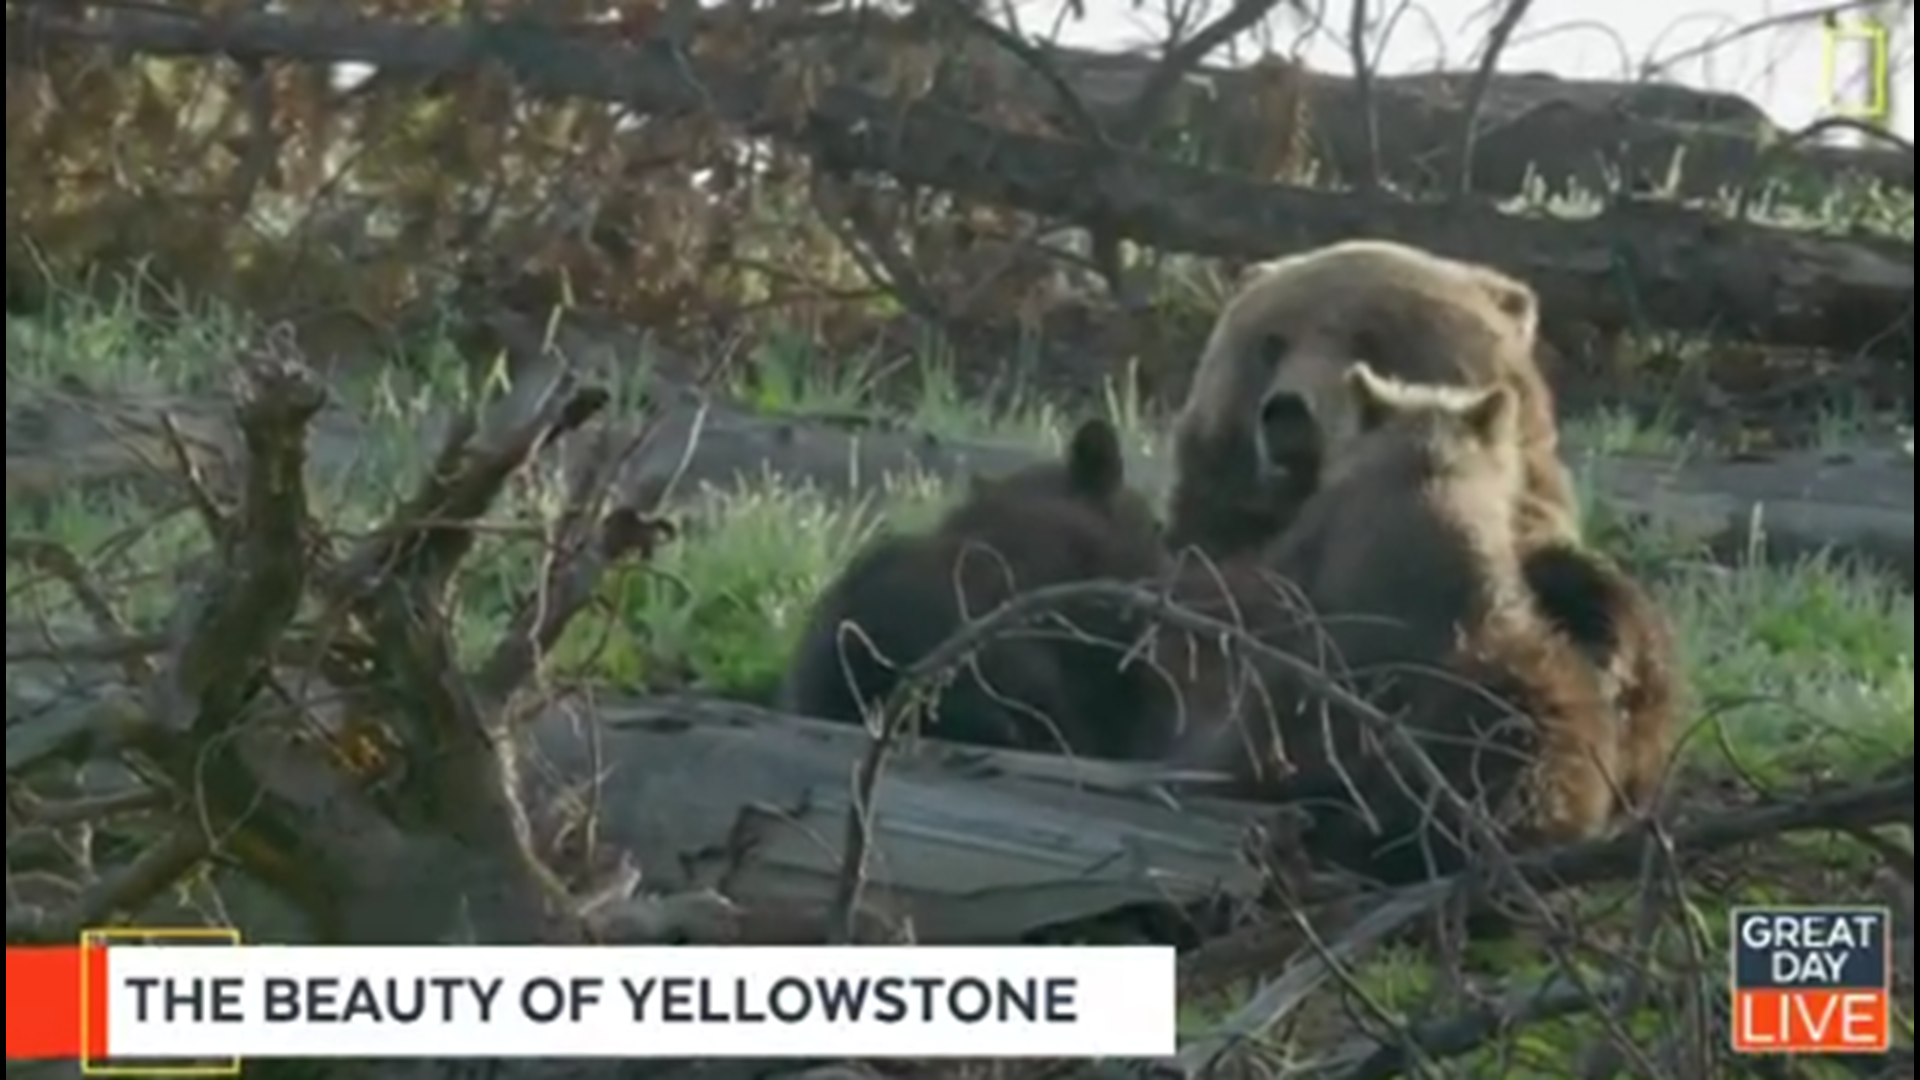 “Yellowstone Live” premieres at 10 p.m. Sunday night on National Geographic and Nat Geo Wild.